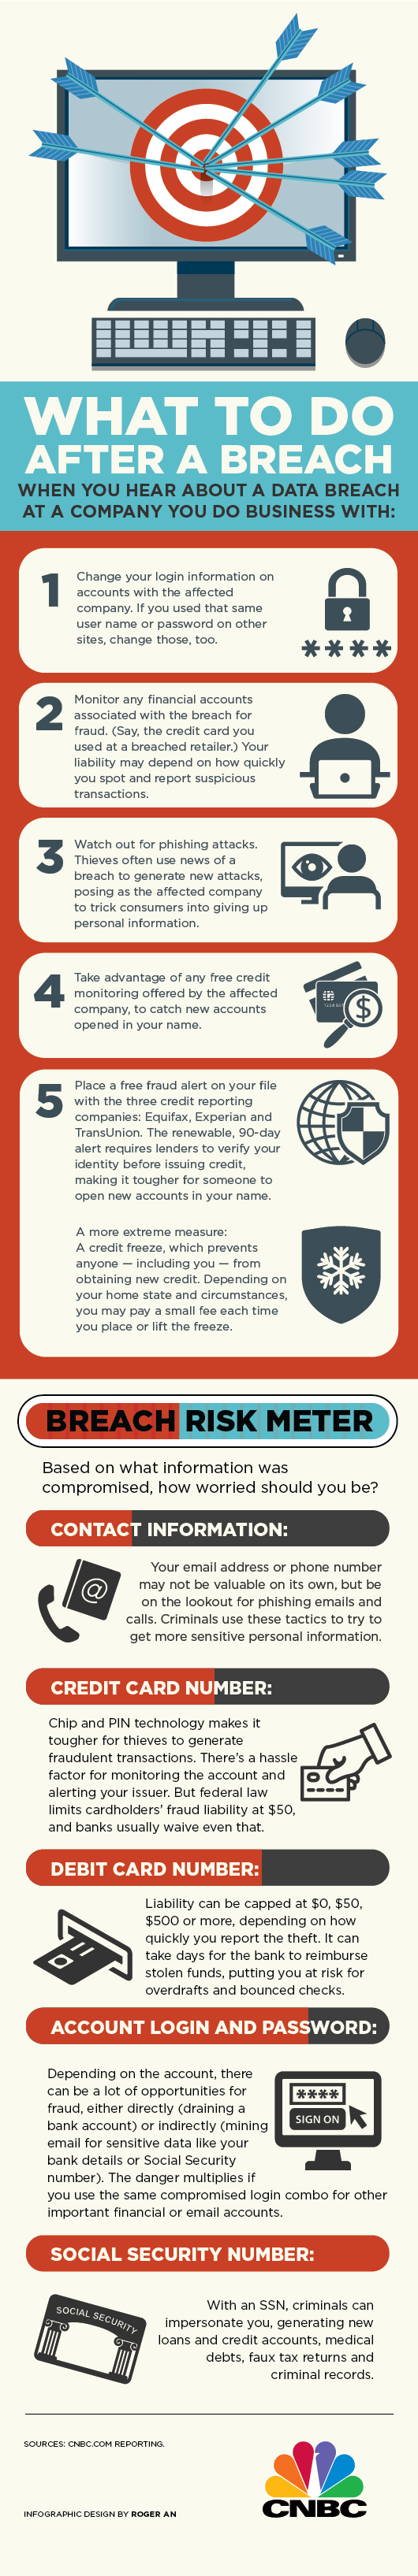 WHAT TO DO FTER A BREACH   WHEN YOU HEAR ABOUT A DATA BREACH AT A COMPANY YOU DO BUSINESS WITH:  1  Change your login information on accounts with the affected company. If you used that same user name or password on other sites, change those, too.  L   n   *  r2  L  Monitor any financial accounts associated with the breach for fraud. (Say, the credit card you used at a breached retailer.) Your liability may depend on how quickly you spot and report suspicious transactions.   •  r  3   Watch out for phishing attacks. Thieves often use news of a breach to generate new attacks, posing as the affected company to trick consumers into giving up personal information.   i^  r 4   Take advantage of any free credit monitoring offered by the affected company, to catch new accounts opened in your name.   5  Place a free fraud alert on your file with the three credit reporting companies: Equifax, Experian and TransUnion. The renewable, 90-day alert requires lenders to verify your identity before issuing credit, making it tougher for someone to open new accounts in your name.  A more extreme measure: A credit freeze, which prevents anyone — including you — from obtaining new credit. Depending on your home state and circumstances, you may pay a small fee each time you place or lift the freeze.    K  BREACH  RISK METER  Based on what information was compromised, how worried should you be?    INFORMATION:   Your email address or phone number may not be valuable on its own, but be on the lookout for phishing emails and calls. Criminals use these tactics to try to get more sensitive personal information.  CREDIT CARD NU   Chip and PIN technology makes it tougher for thieves to generate fraudulent transactions. There's a hassle factor for monitoring the account and alerting your issuer. But federal law limits cardholders' fraud liability at $50, and banks usually waive even that.   DEBIT CARD NUMBER:      Liability can be capped at $0, $50, $500 or more, depending on how quickly you report the theft. It can take days for the bank to reimburse stolen funds, putting you at risk for overdrafts and bounced checks.  ACCOUNT LOGIN AND PAS  Depending on the account, there can be a lot of opportunities for fraud, either directly (draining a bank account) or indirectly (mining email for sensitive data like your bank details or Social Security number). The danger multiplies if you use the same compromised login combo for other important financial or email accounts.   SIGN ON     SOCIAL SECURITY NUMBER:    With an SSN, criminals can impersonate you, generating new loans and credit accounts, medical debts, faux tax returns and criminal records.  SOURCES: CNBC.COM